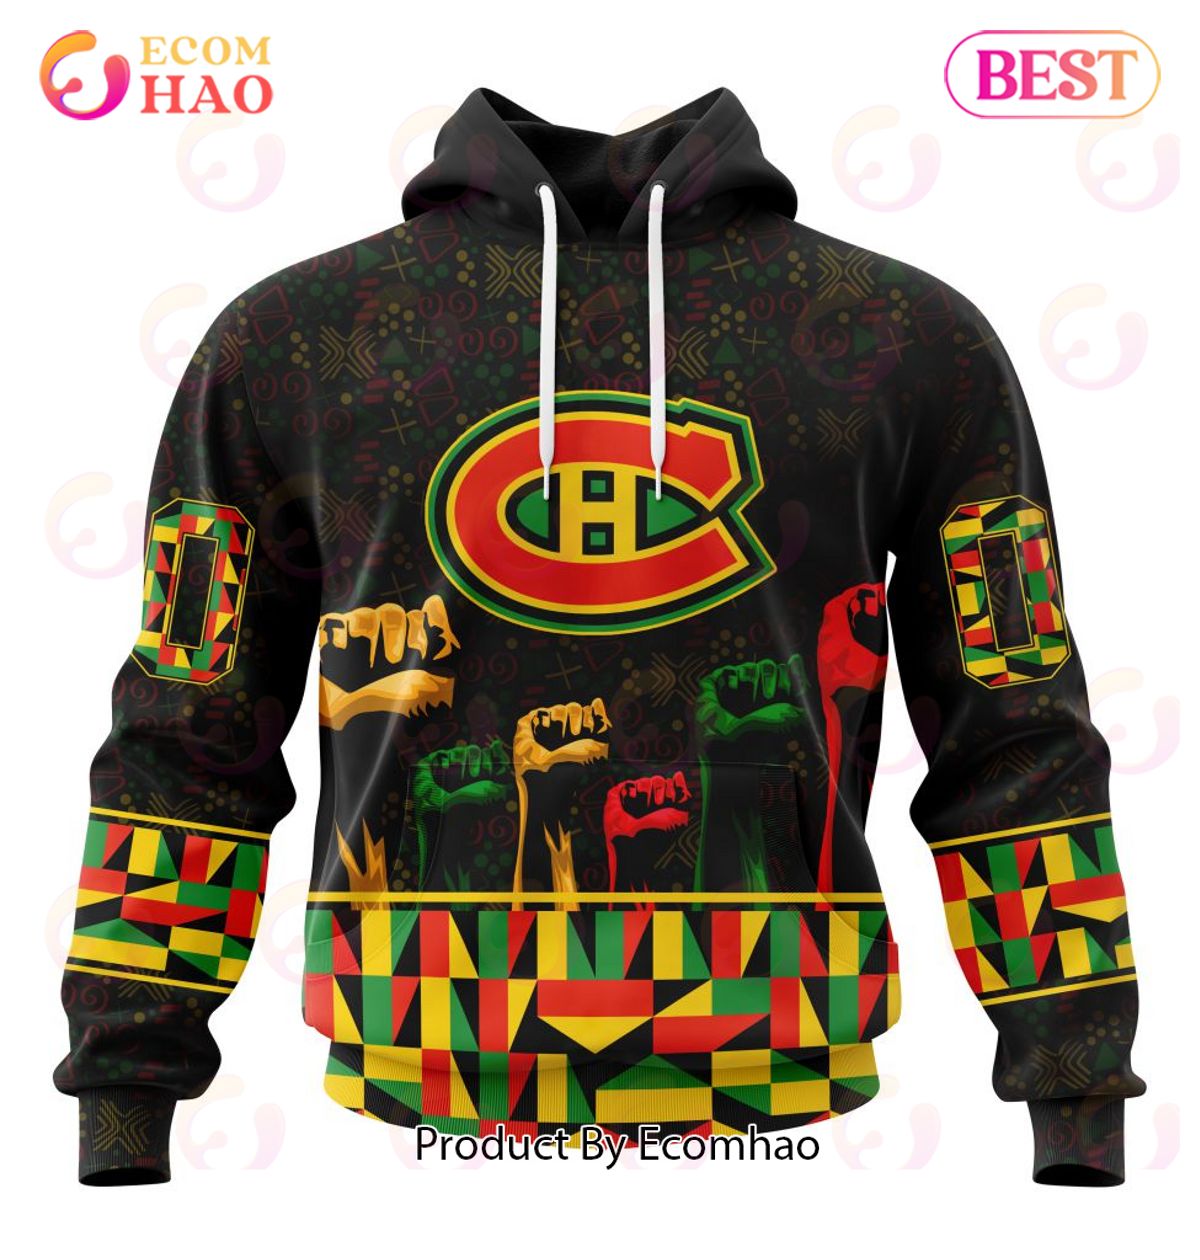 NHL Montreal Canadiens Special Design Celebrate Black History Month 3D Hoodie